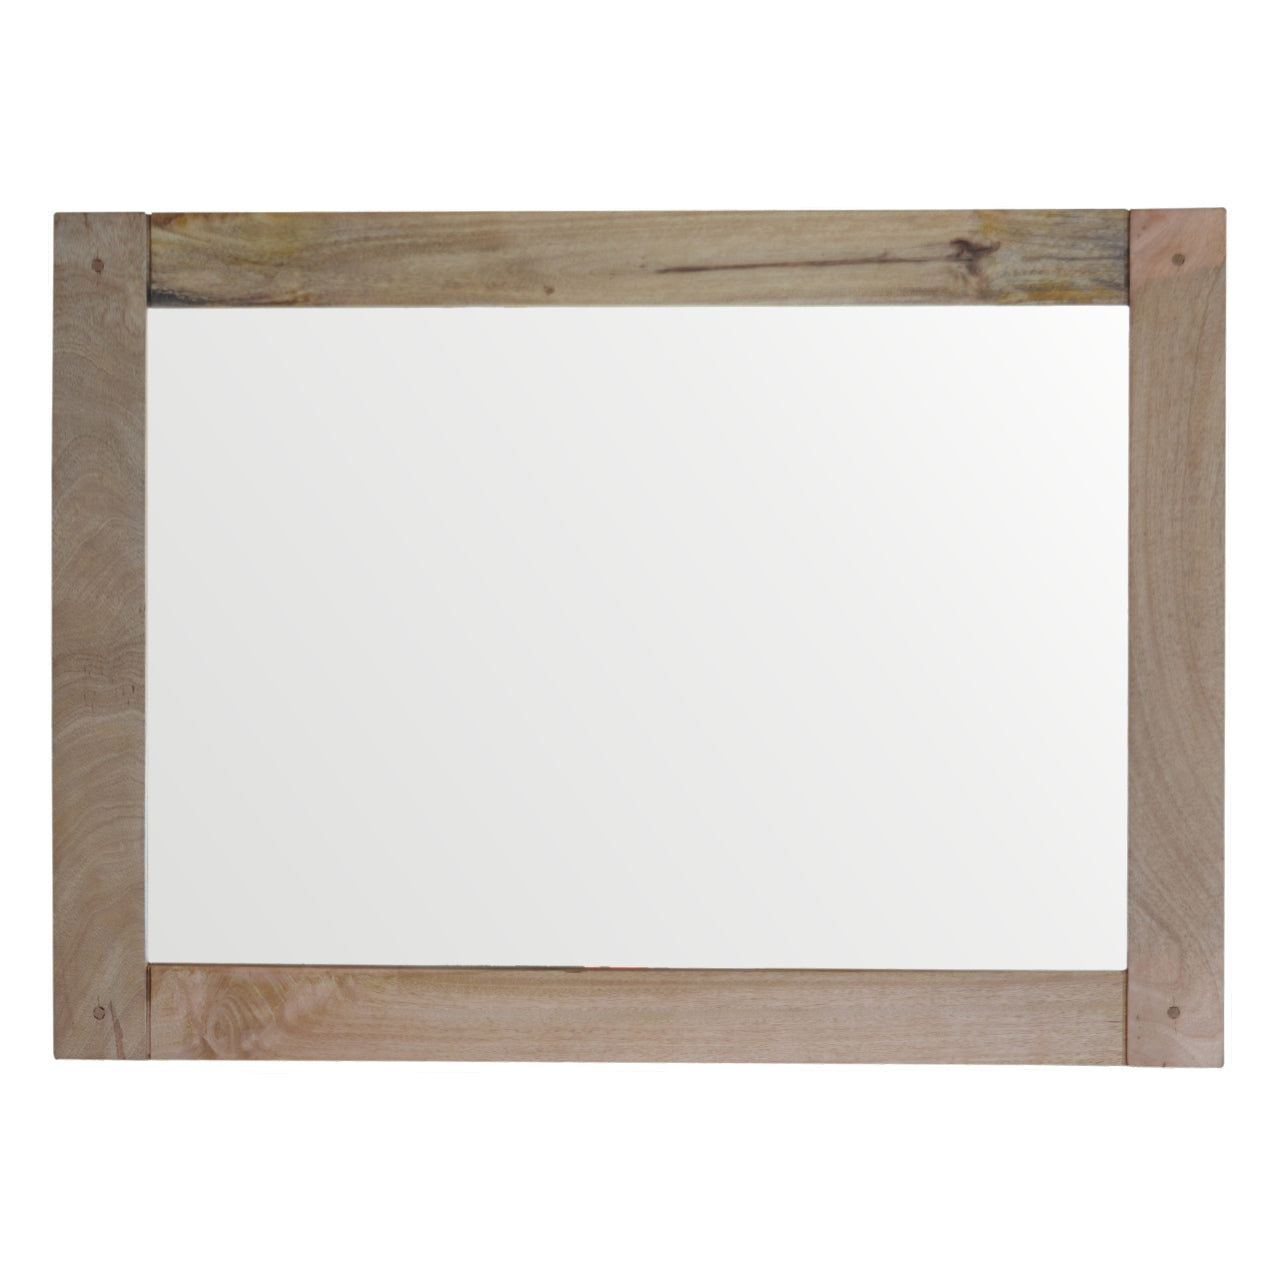 View Granary Royale Wooden Mirror Frame information